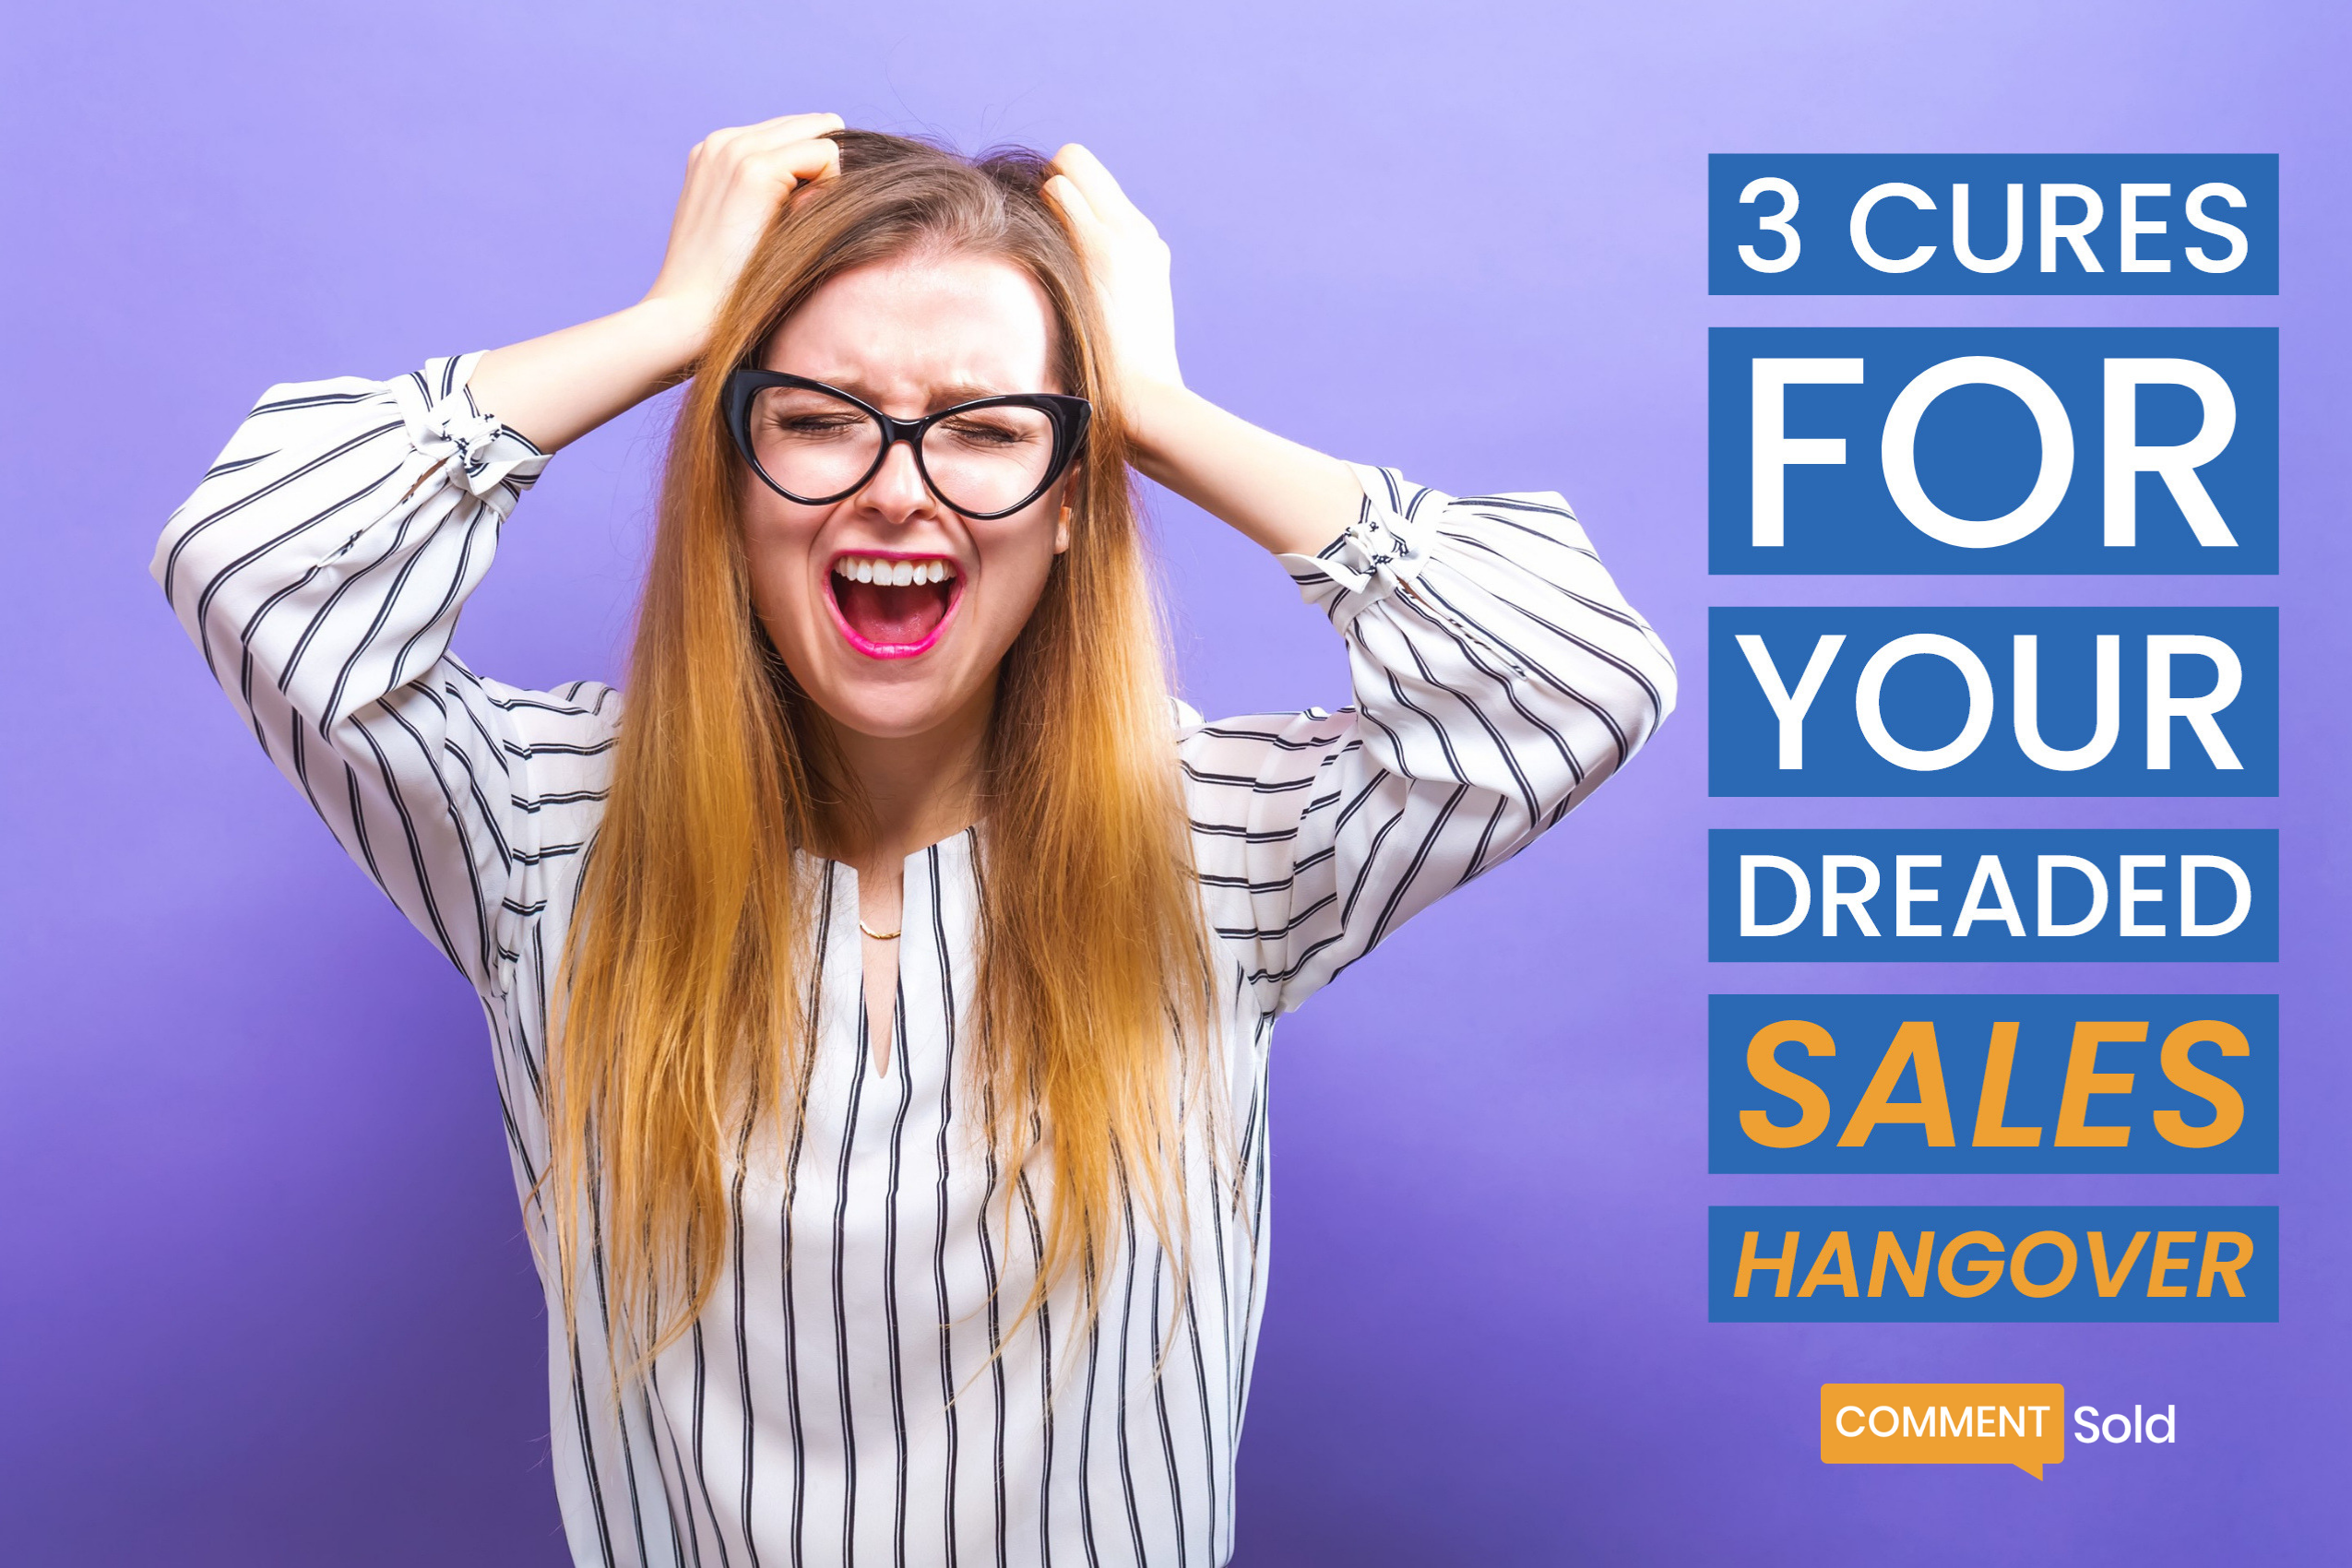 3 Cures for Your Dreaded Sales Hangover